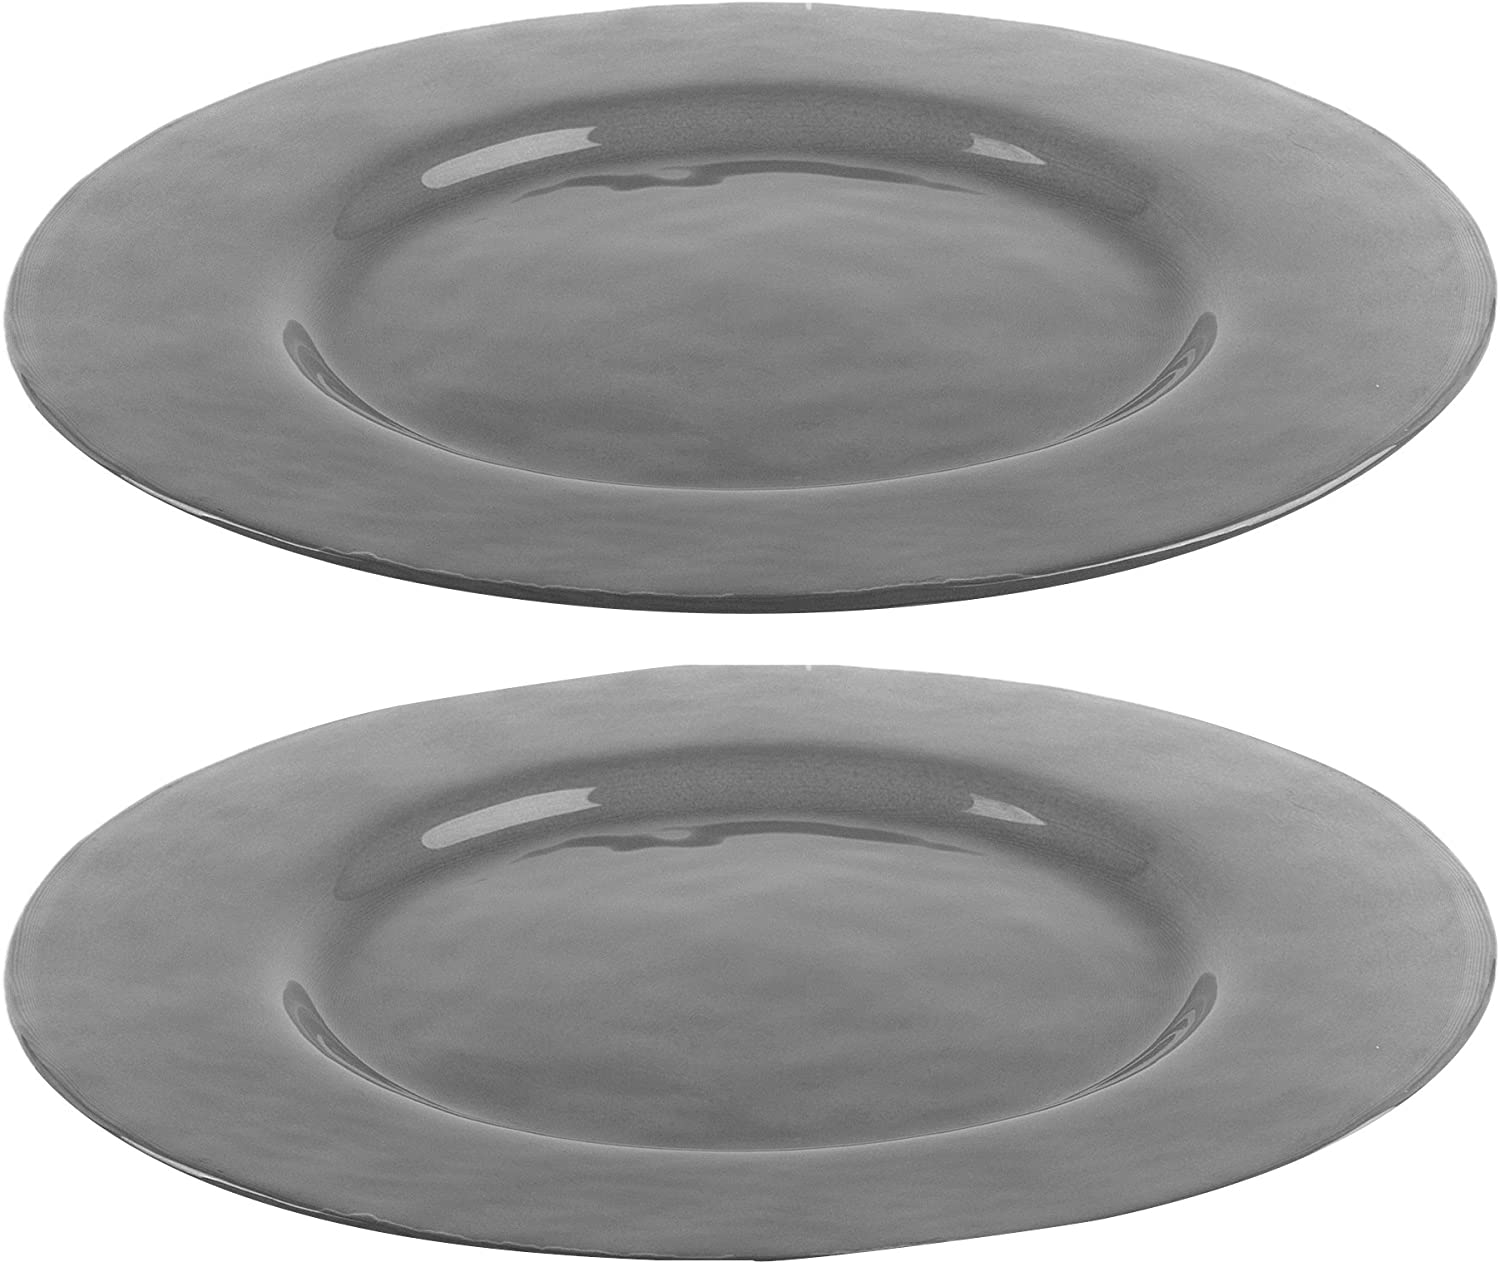 Bohemia Cristal 093 012 045 Play of Colors Set of 2 Plates Approx. Diameter 320 mm Made of Soda-lime Glass Plate, Glass, 1.9 x 32 x 1.9 cm, 1.9 x 32 x 1.9 cm